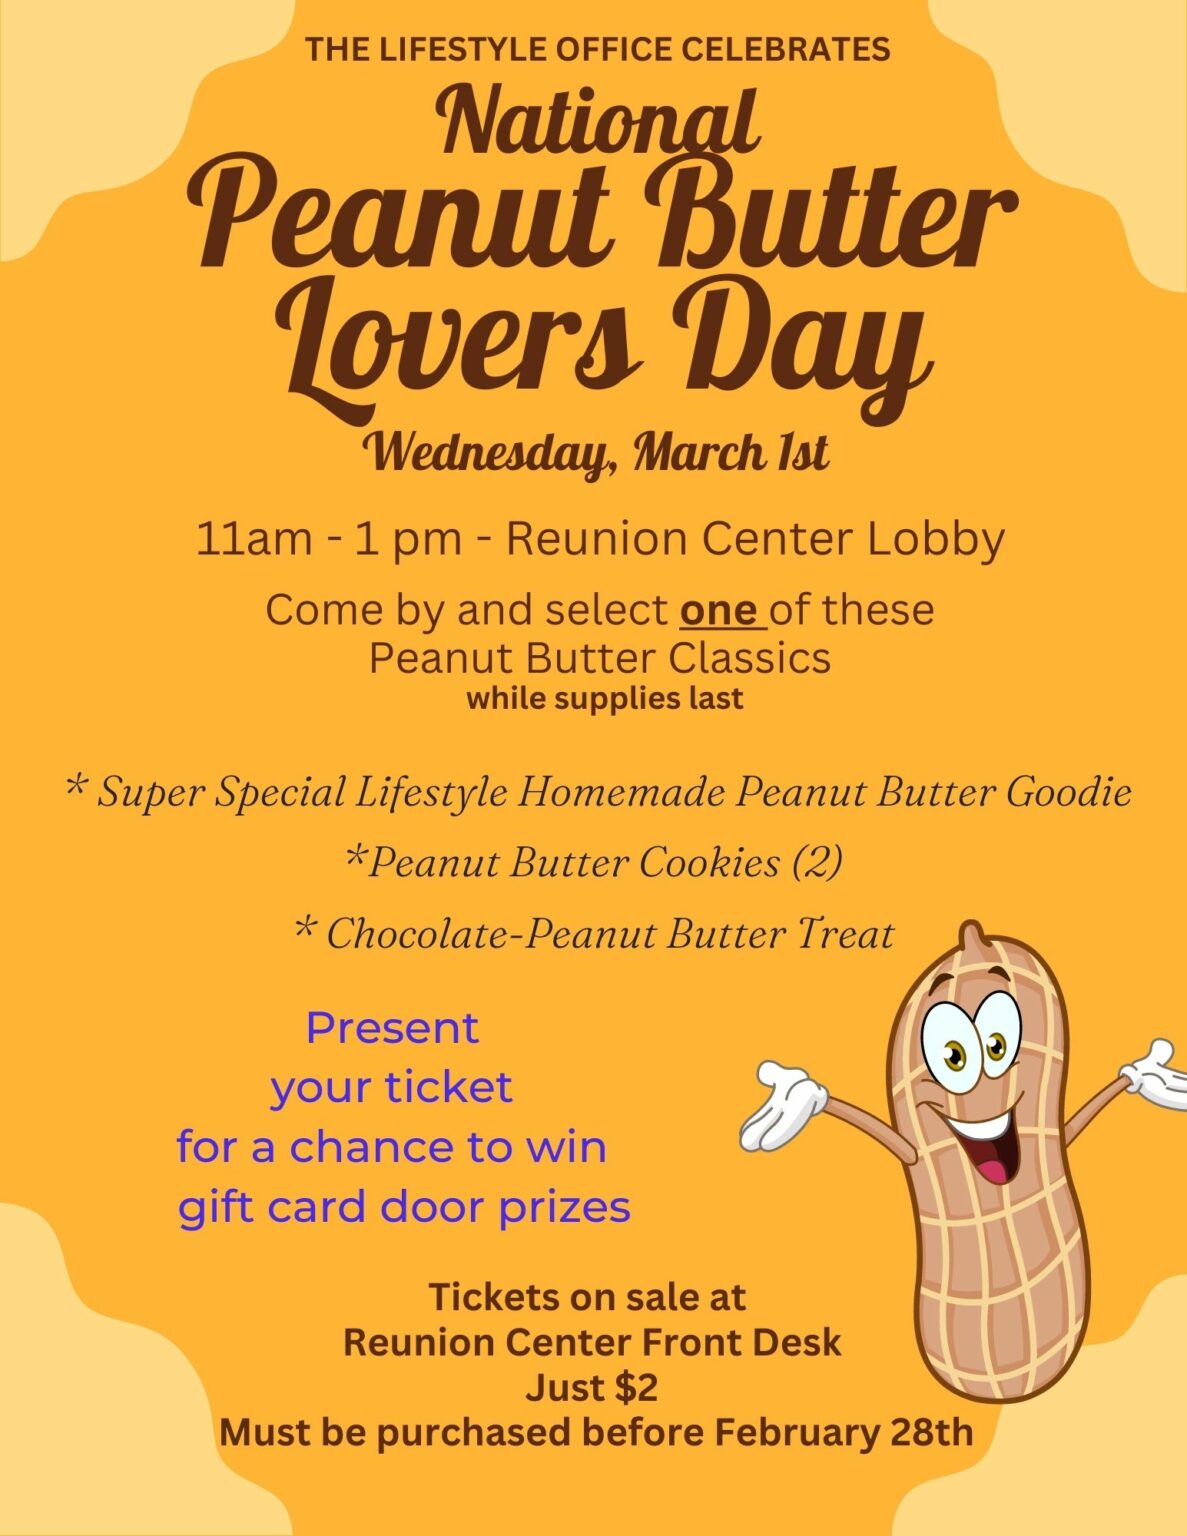 National Peanut Butter Lovers Day Stone Creek